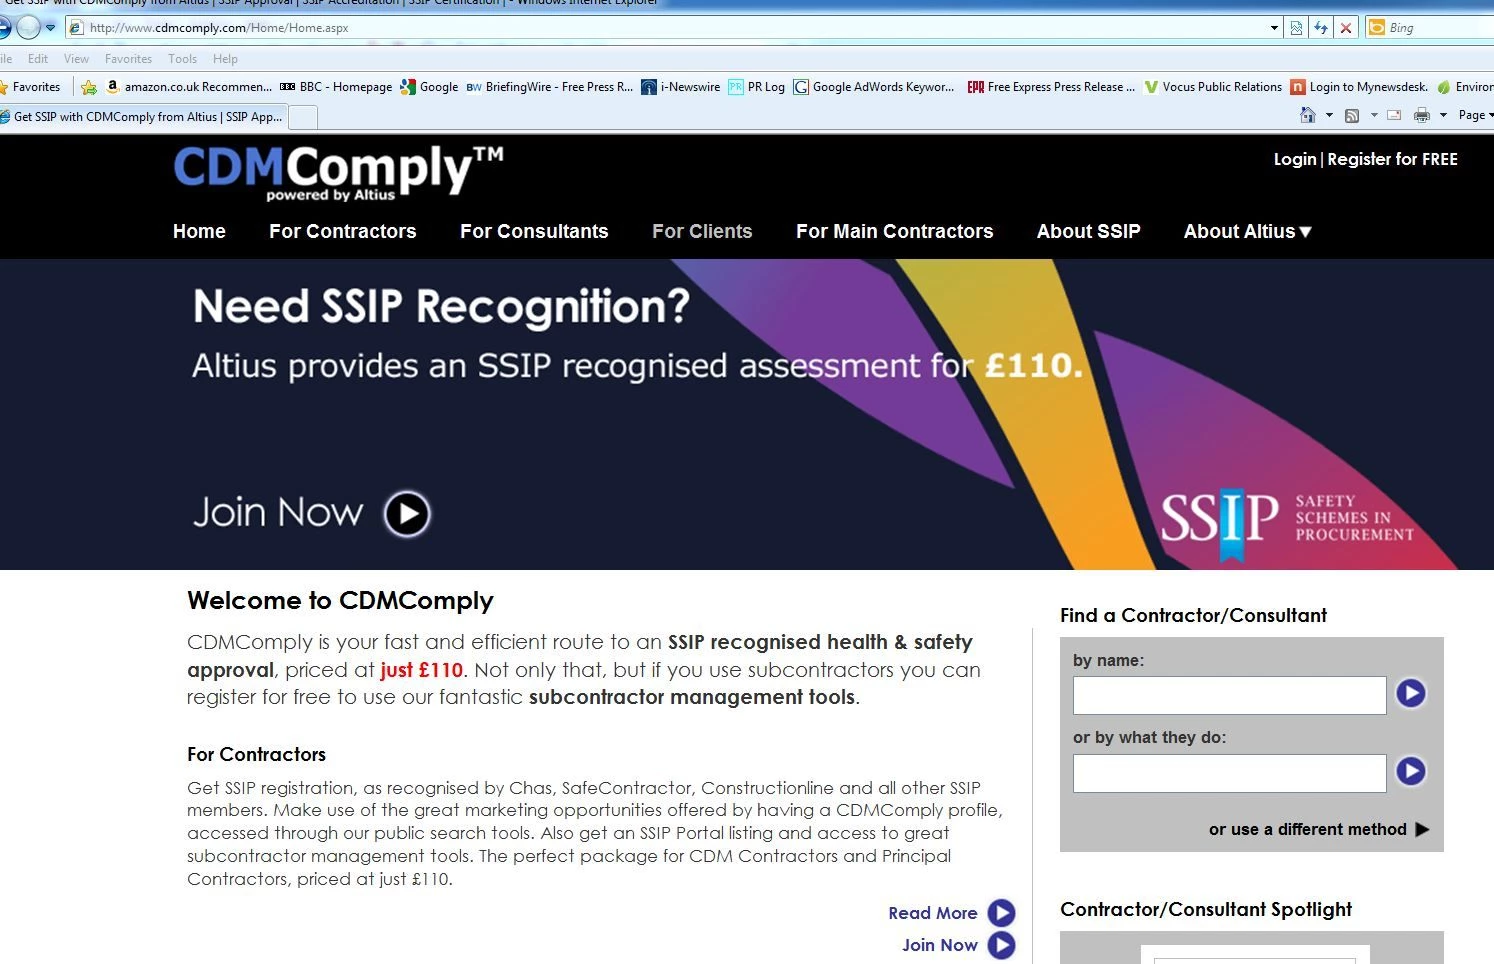 CDMComply online SSIP approved assessment